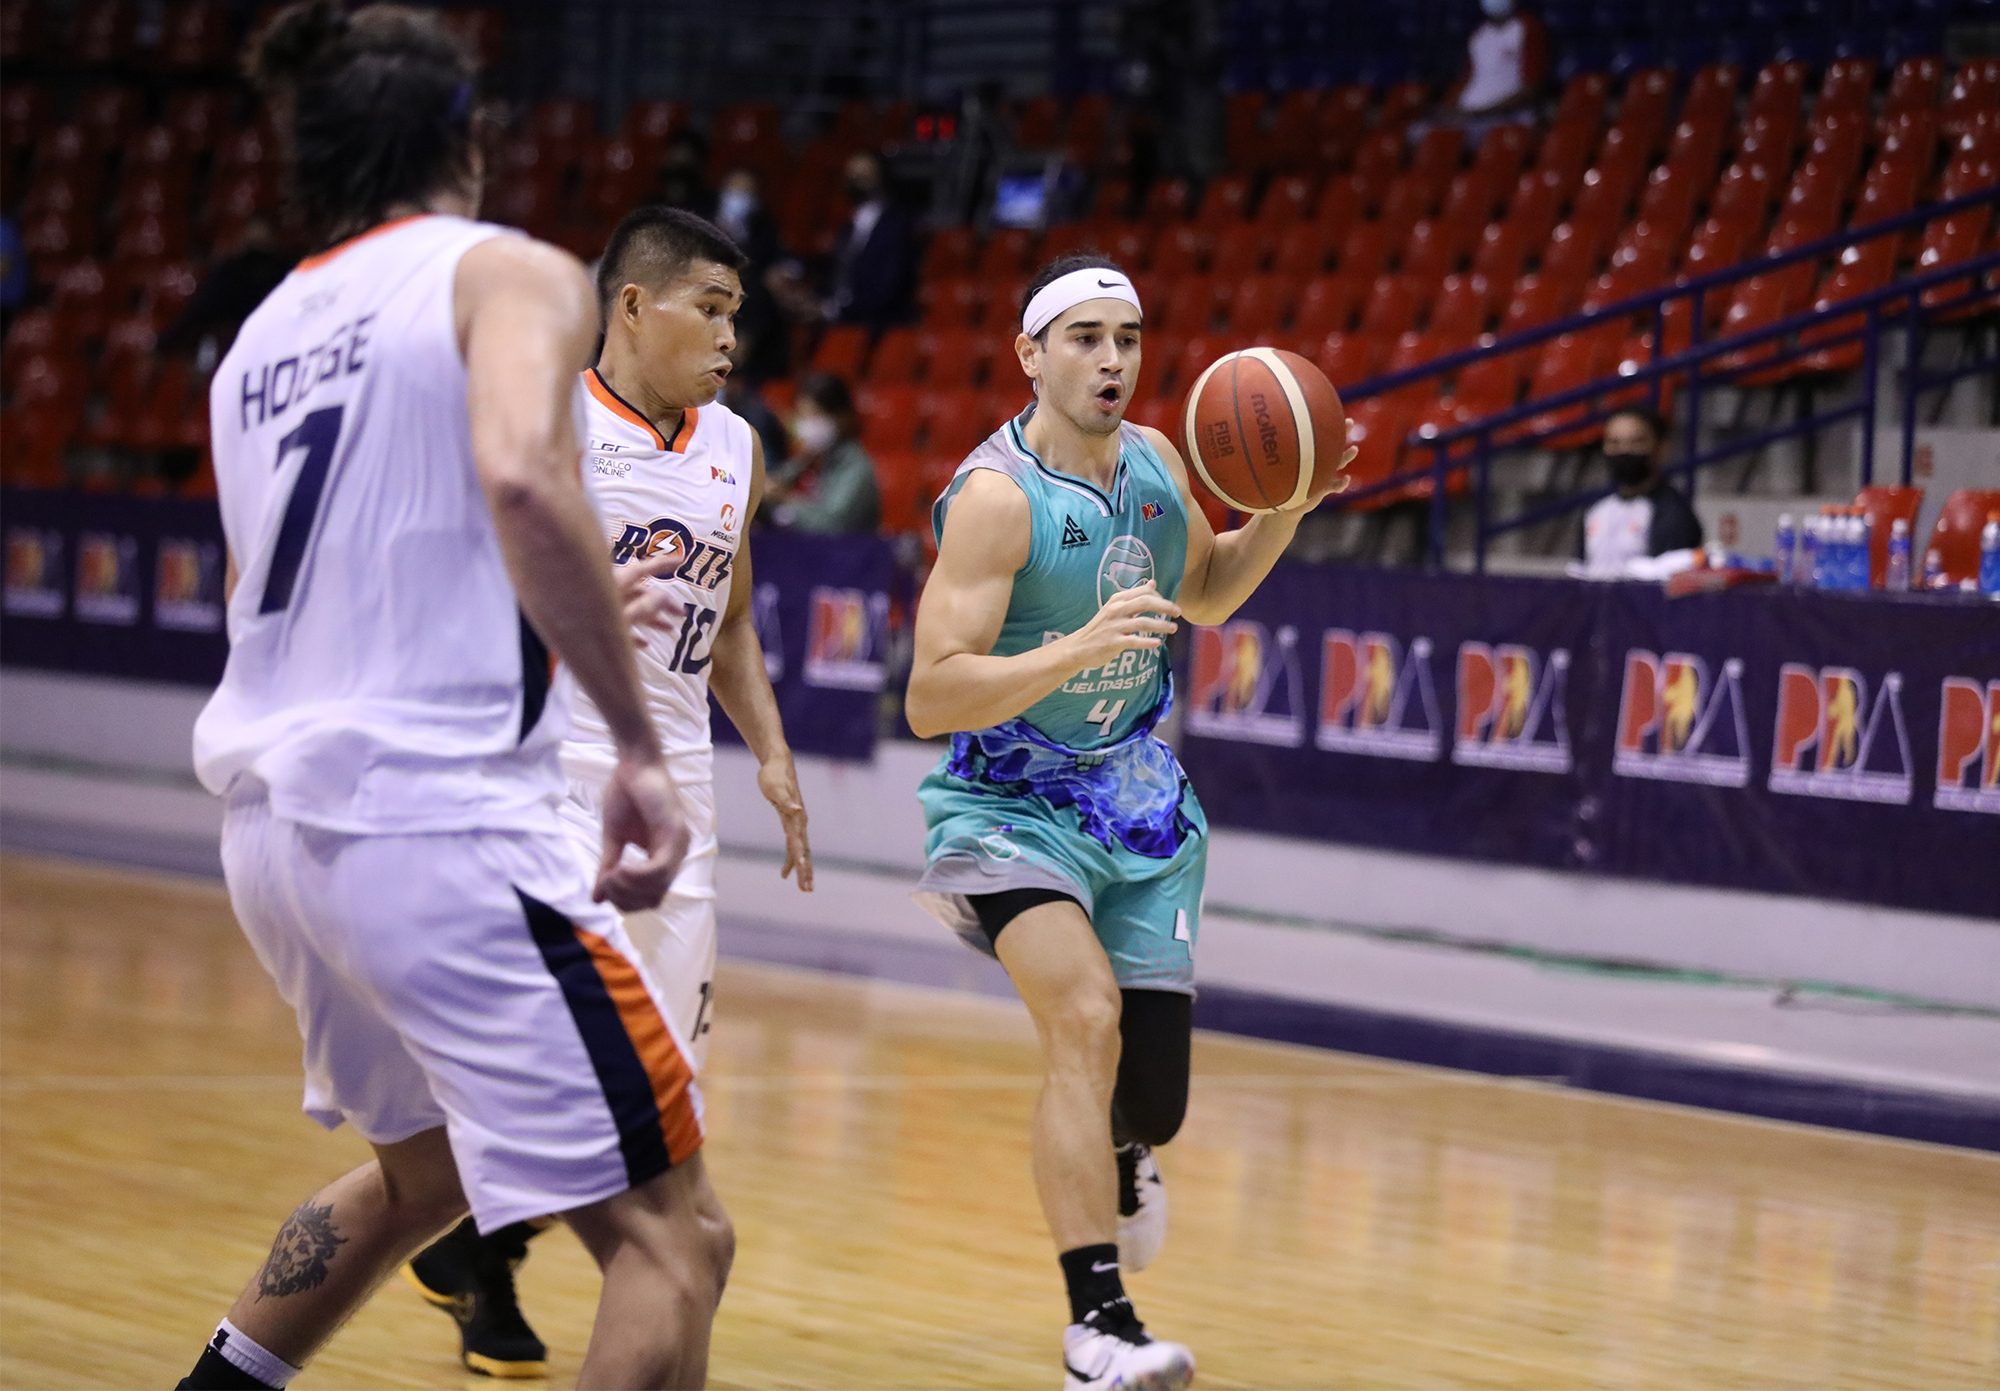 Chris Banchero leaves Phoenix, signs with Meralco in free agency